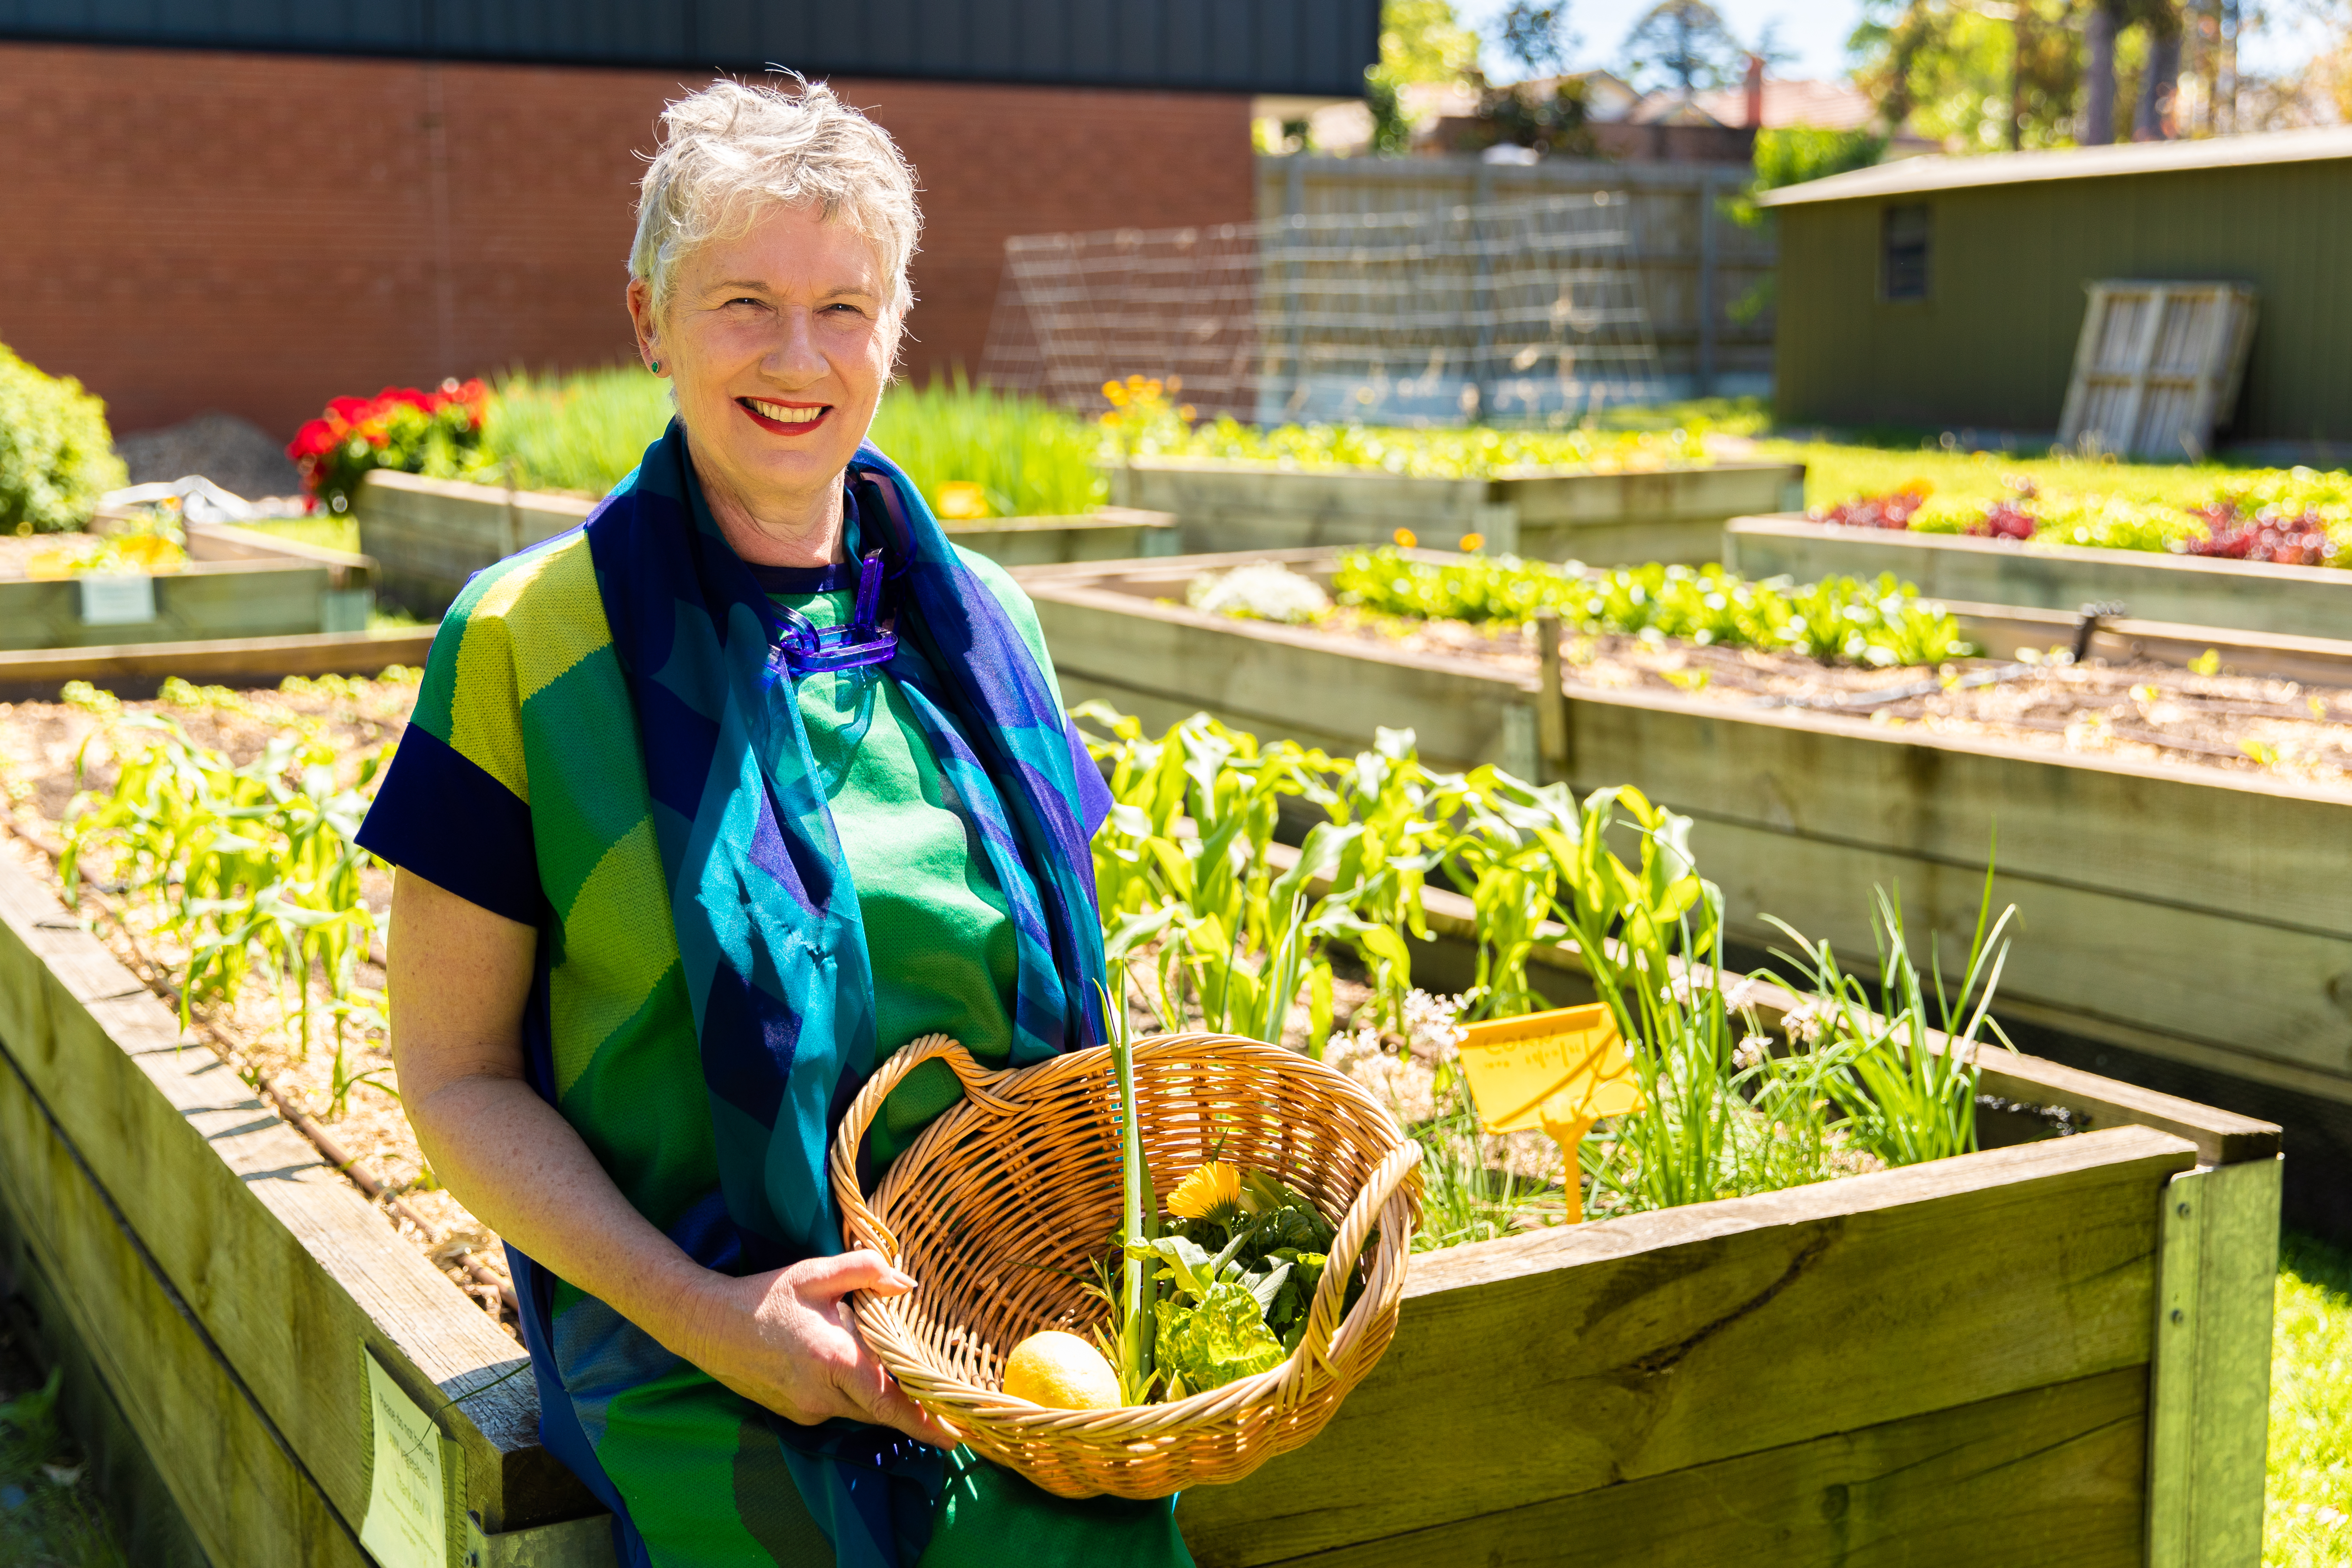 a woman stands with a basket of produce in front of raised garden beds